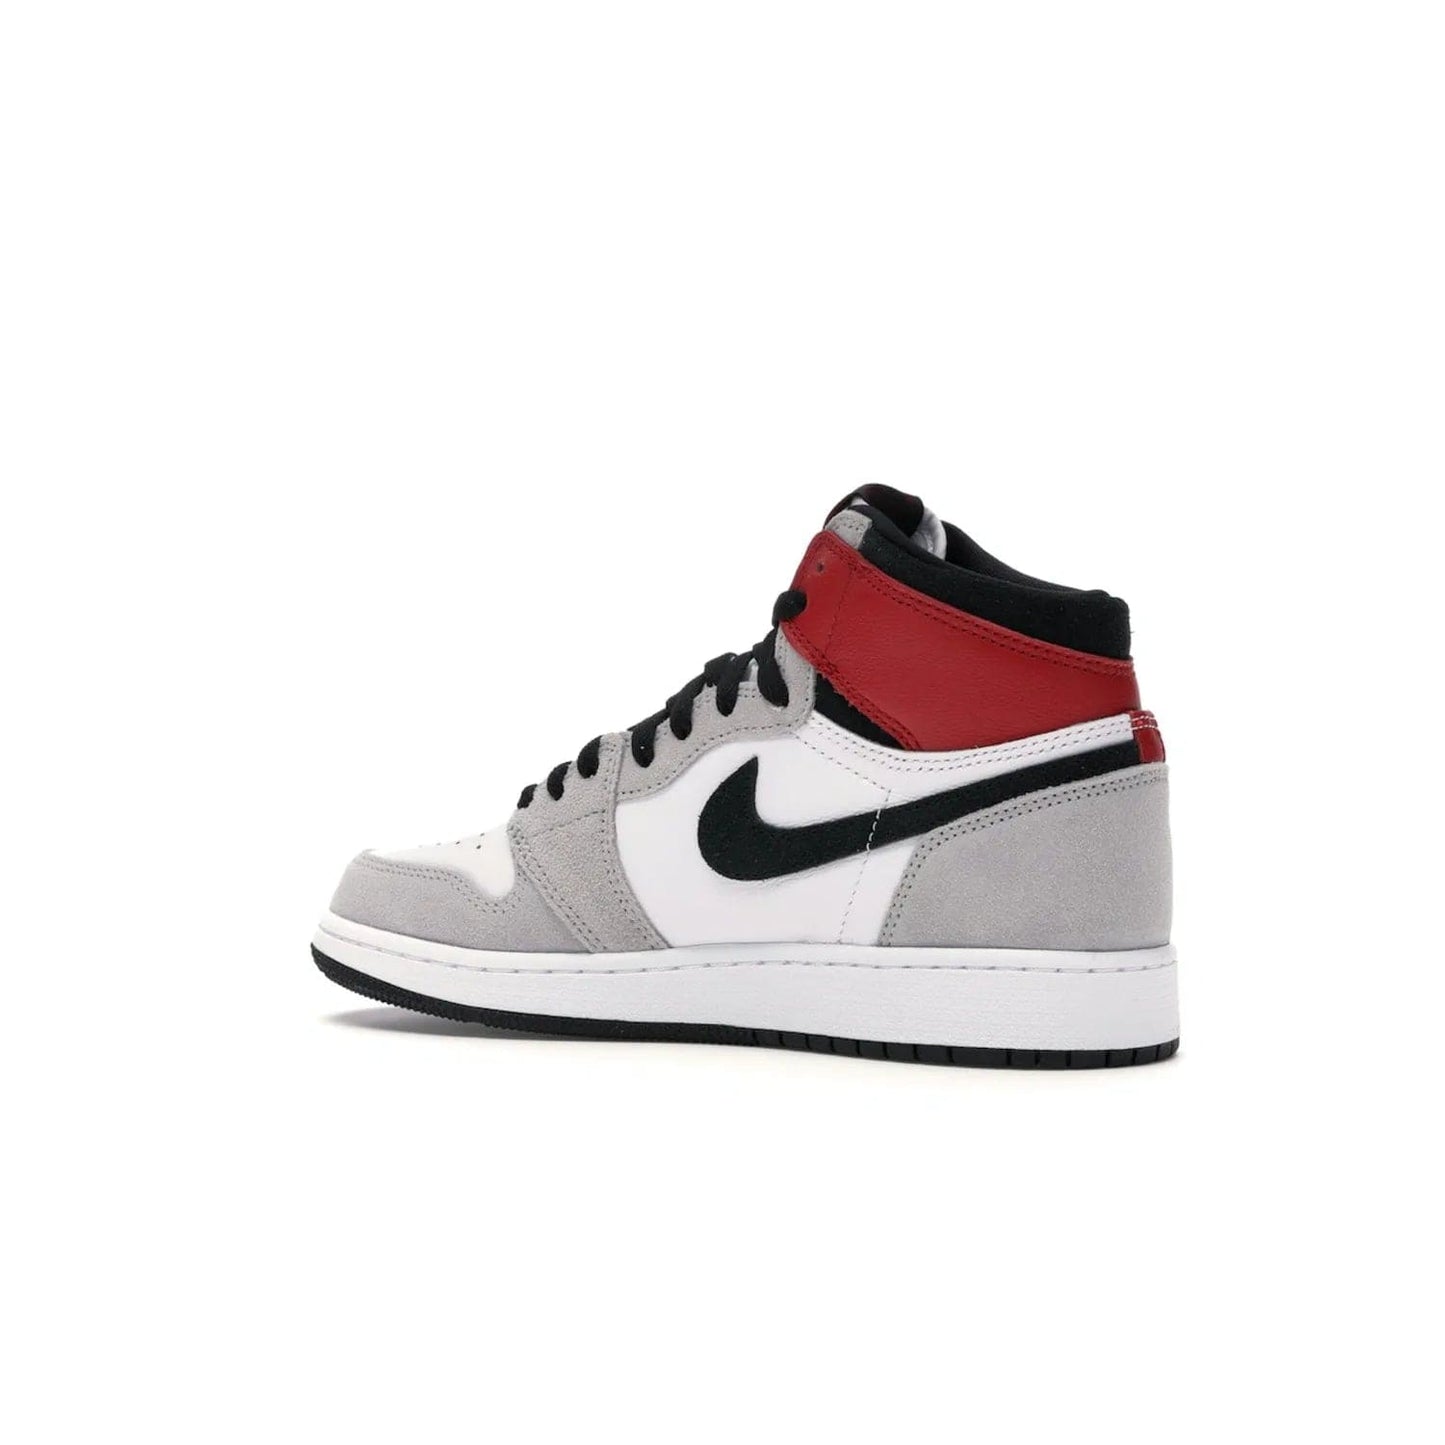 Jordan 1 Retro High Light Smoke Grey (GS) - Image 22 - Only at www.BallersClubKickz.com - Jordan 1 Retro High Light Smoke Grey (GS) features shades of grey, black, and Varsity Red with a bold silhouette. Premium white leather and suede overlays create a unique look. Released July 2020, offering style and performance. Perfect sneaker for any collector or fan.